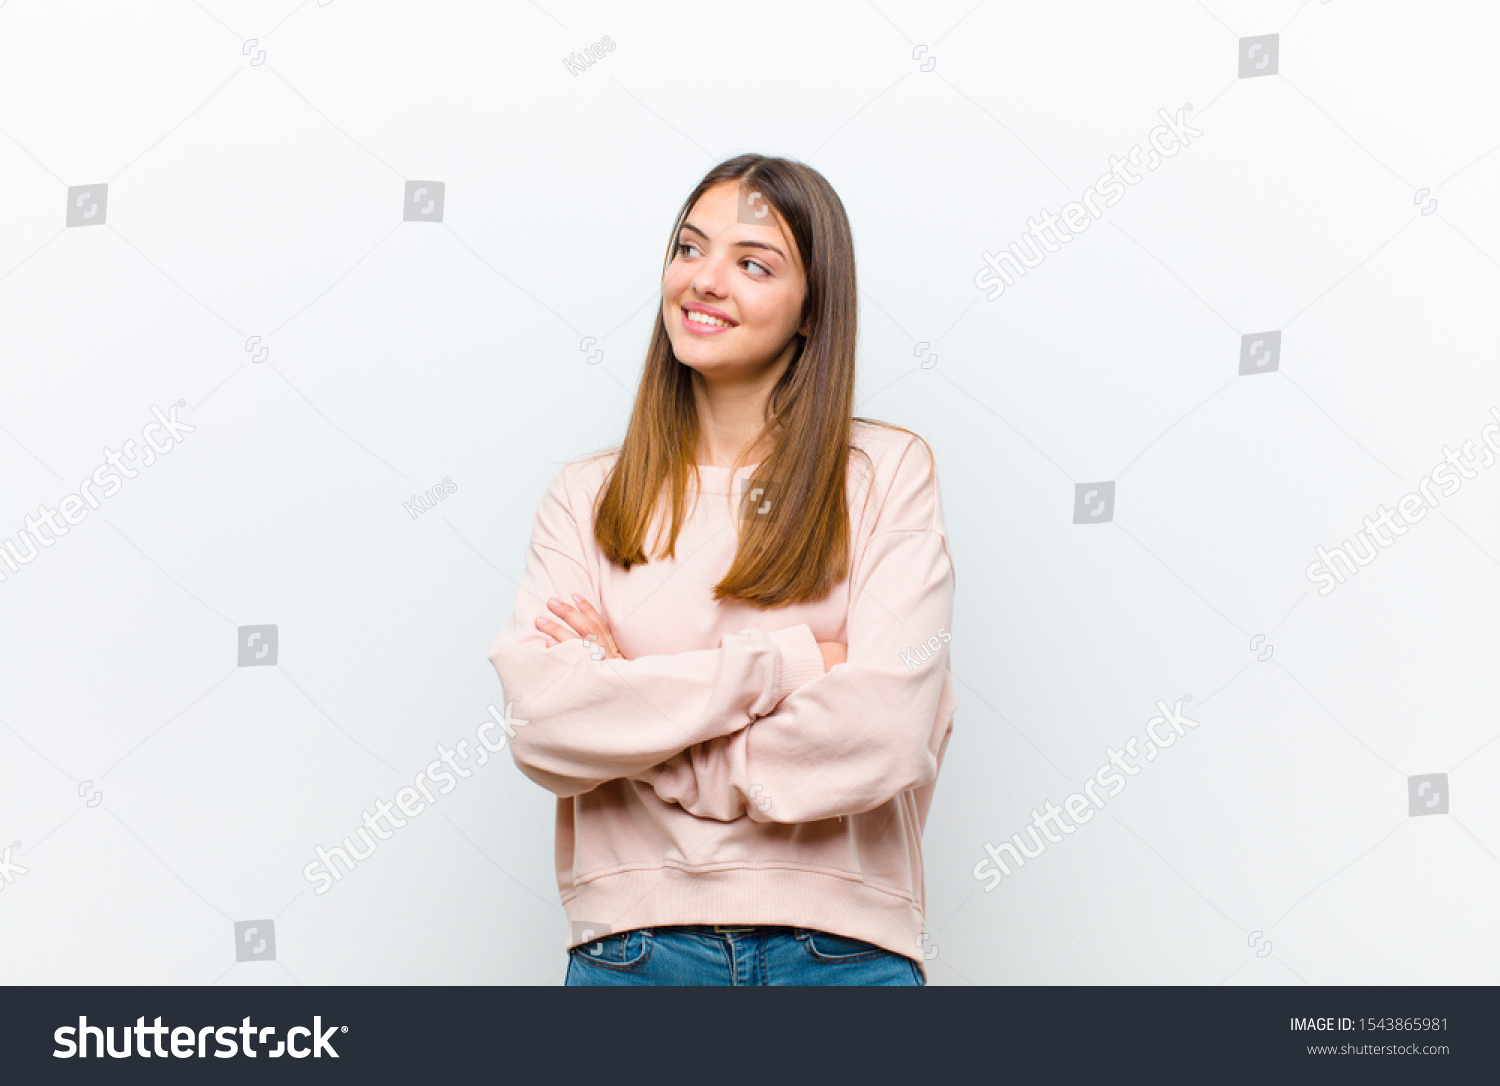 young pretty woman feeling happy, proud and hopeful, wondering or thinking, looking up to copy space with crossed arms against white background #1543865981